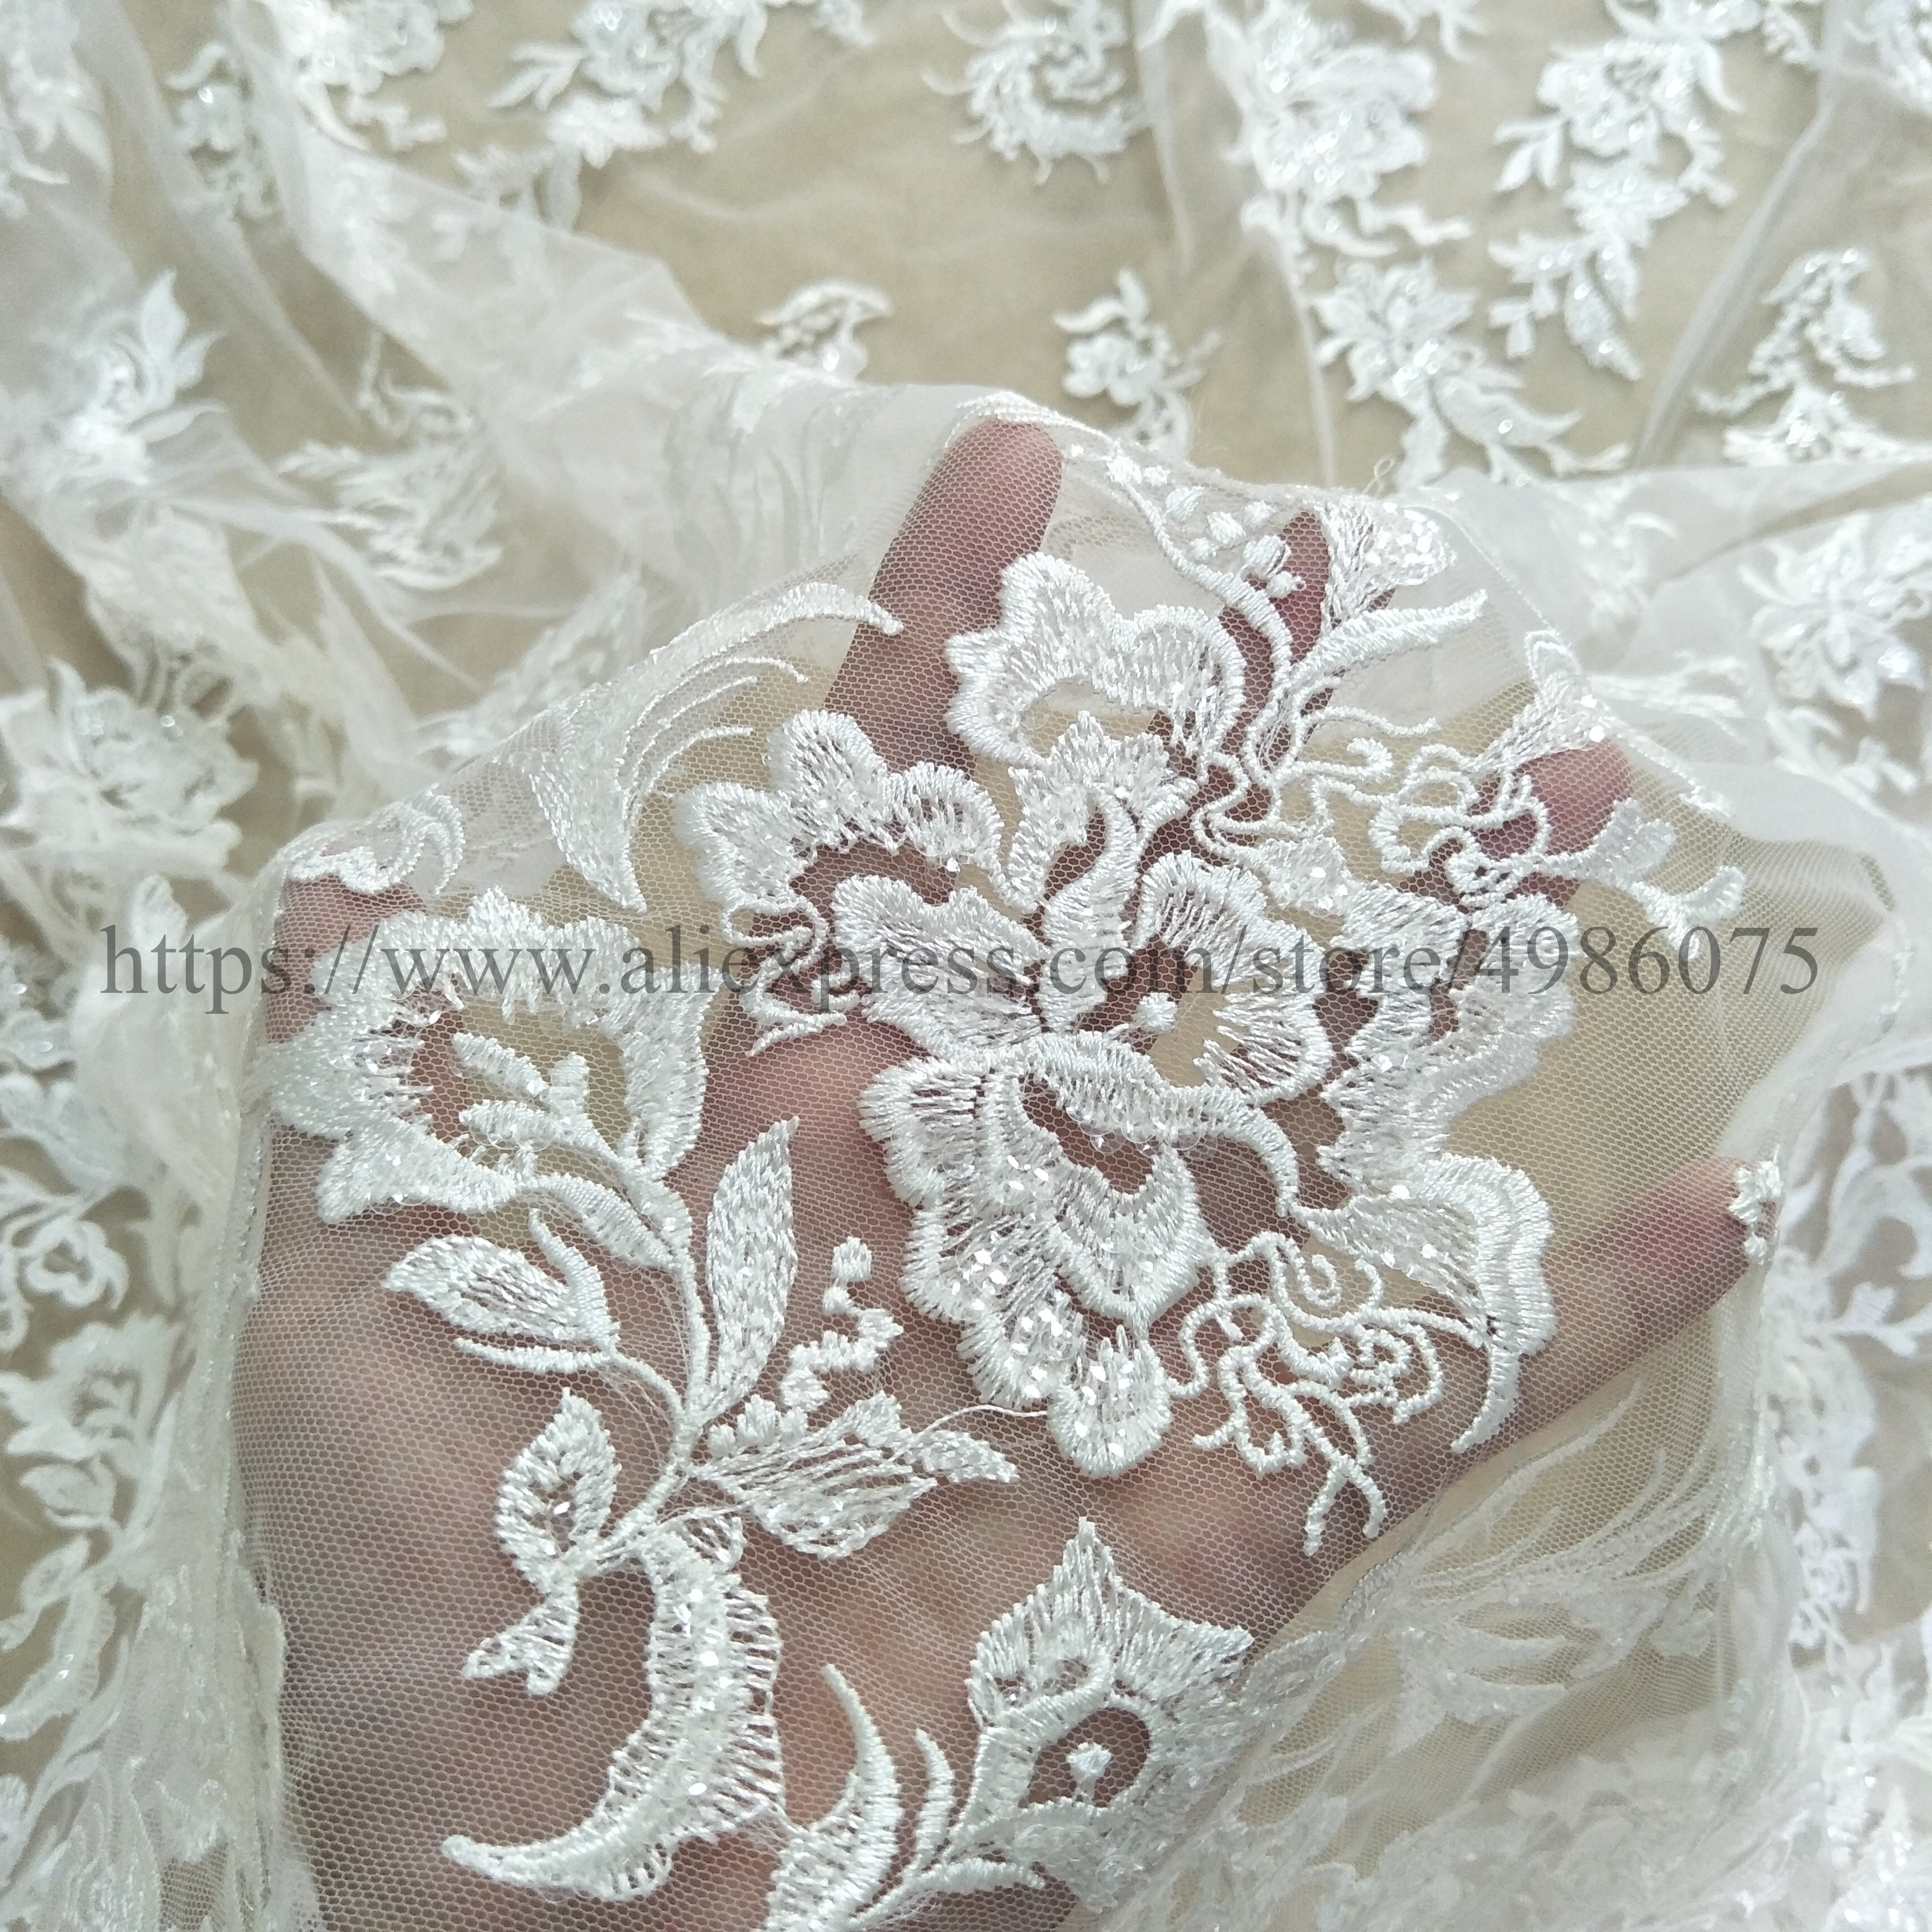 2021New arrival fashion dress lace fabric sequins lace fabric 130cm width bridal lace fabric sell by yard